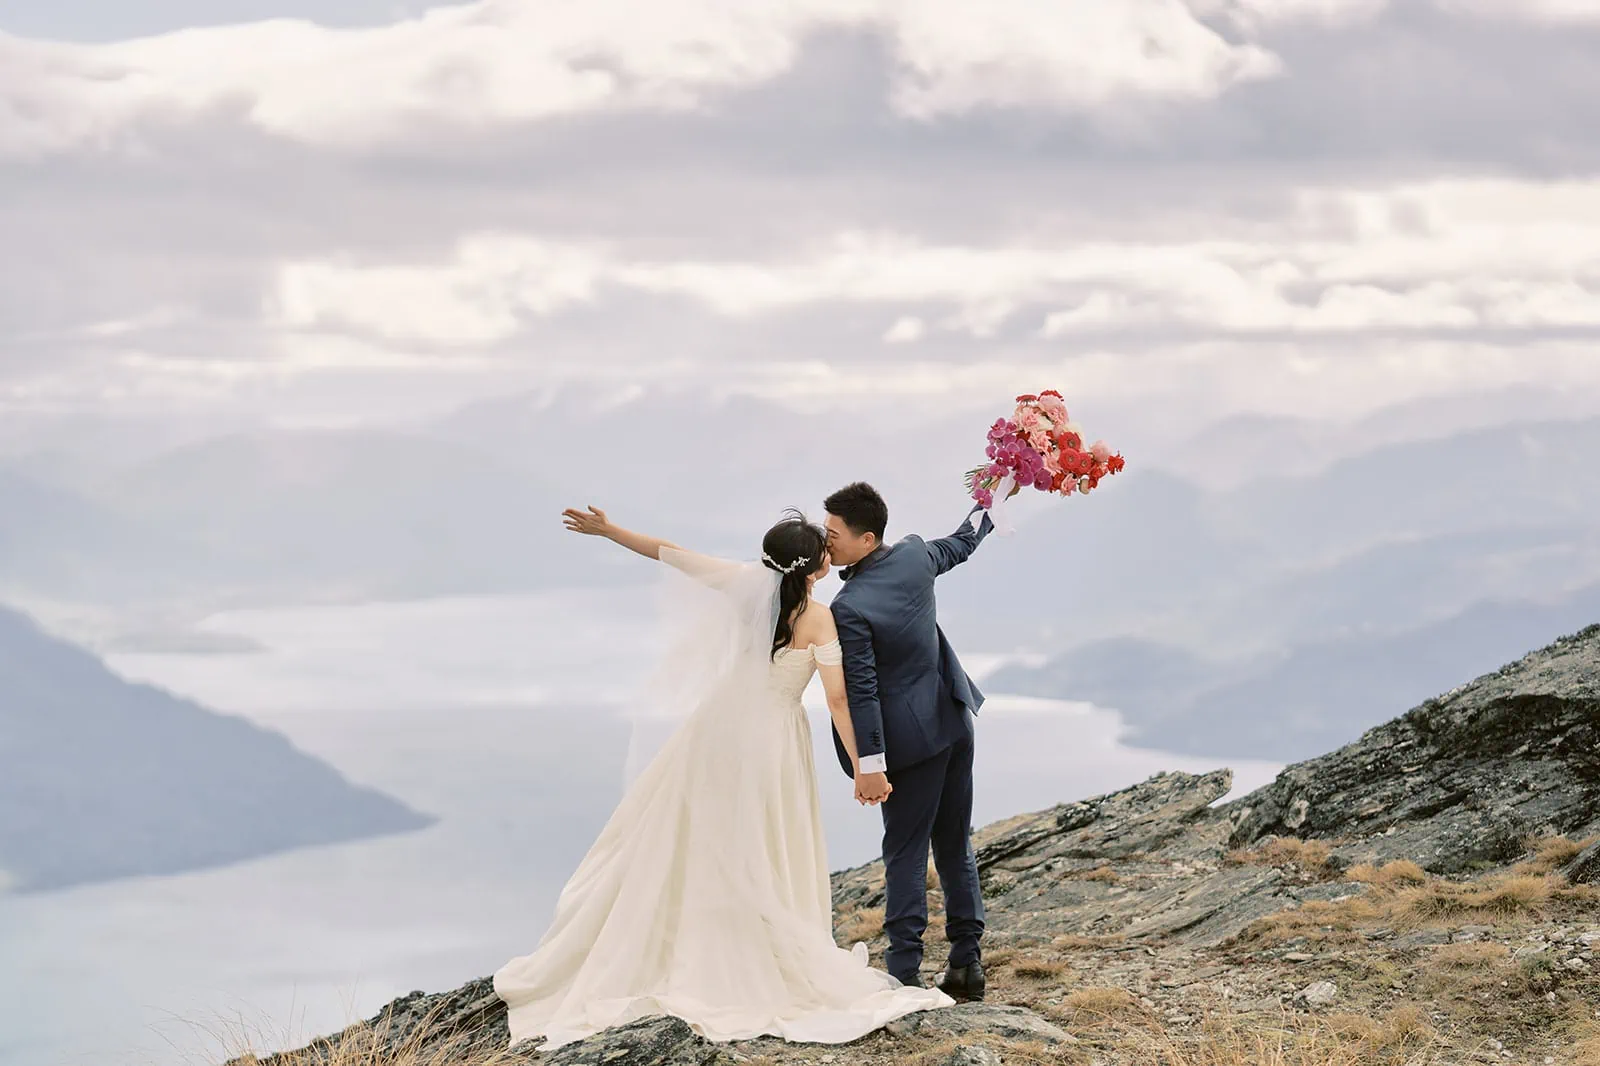 Queenstown Elopement Heli Wedding Photographer クイーンズタウン結婚式 | A couple, dressed in wedding attire, poses for a pre-wedding photoshoot on top of a mountain overlooking Lake Wanaka.